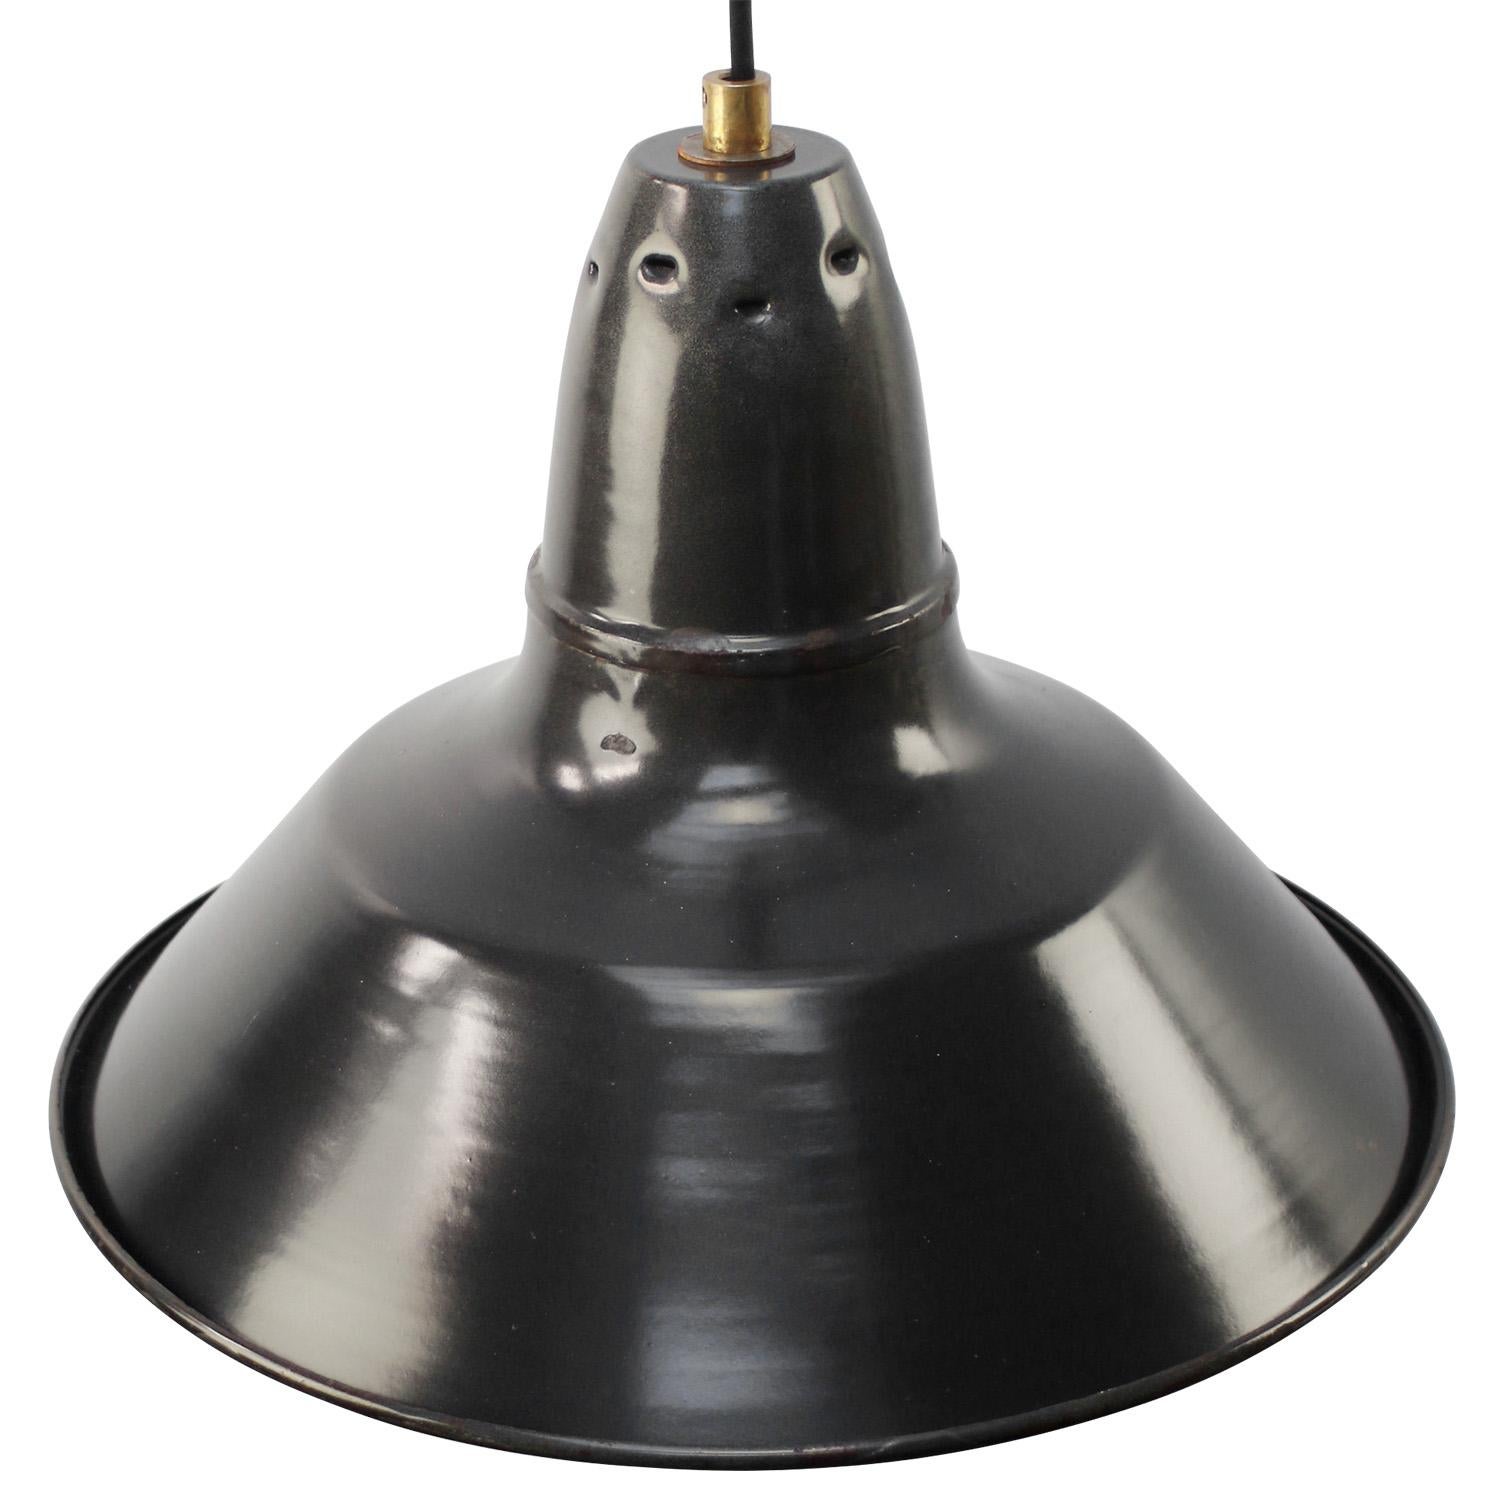 French black / dark grey Industrial pendant lamp.
Used in warehouses and factories in France and Belgium. 

Weight: 1.80 kg / 4 lb

Priced per individual item. All lamps have been made suitable by international standards for incandescent light